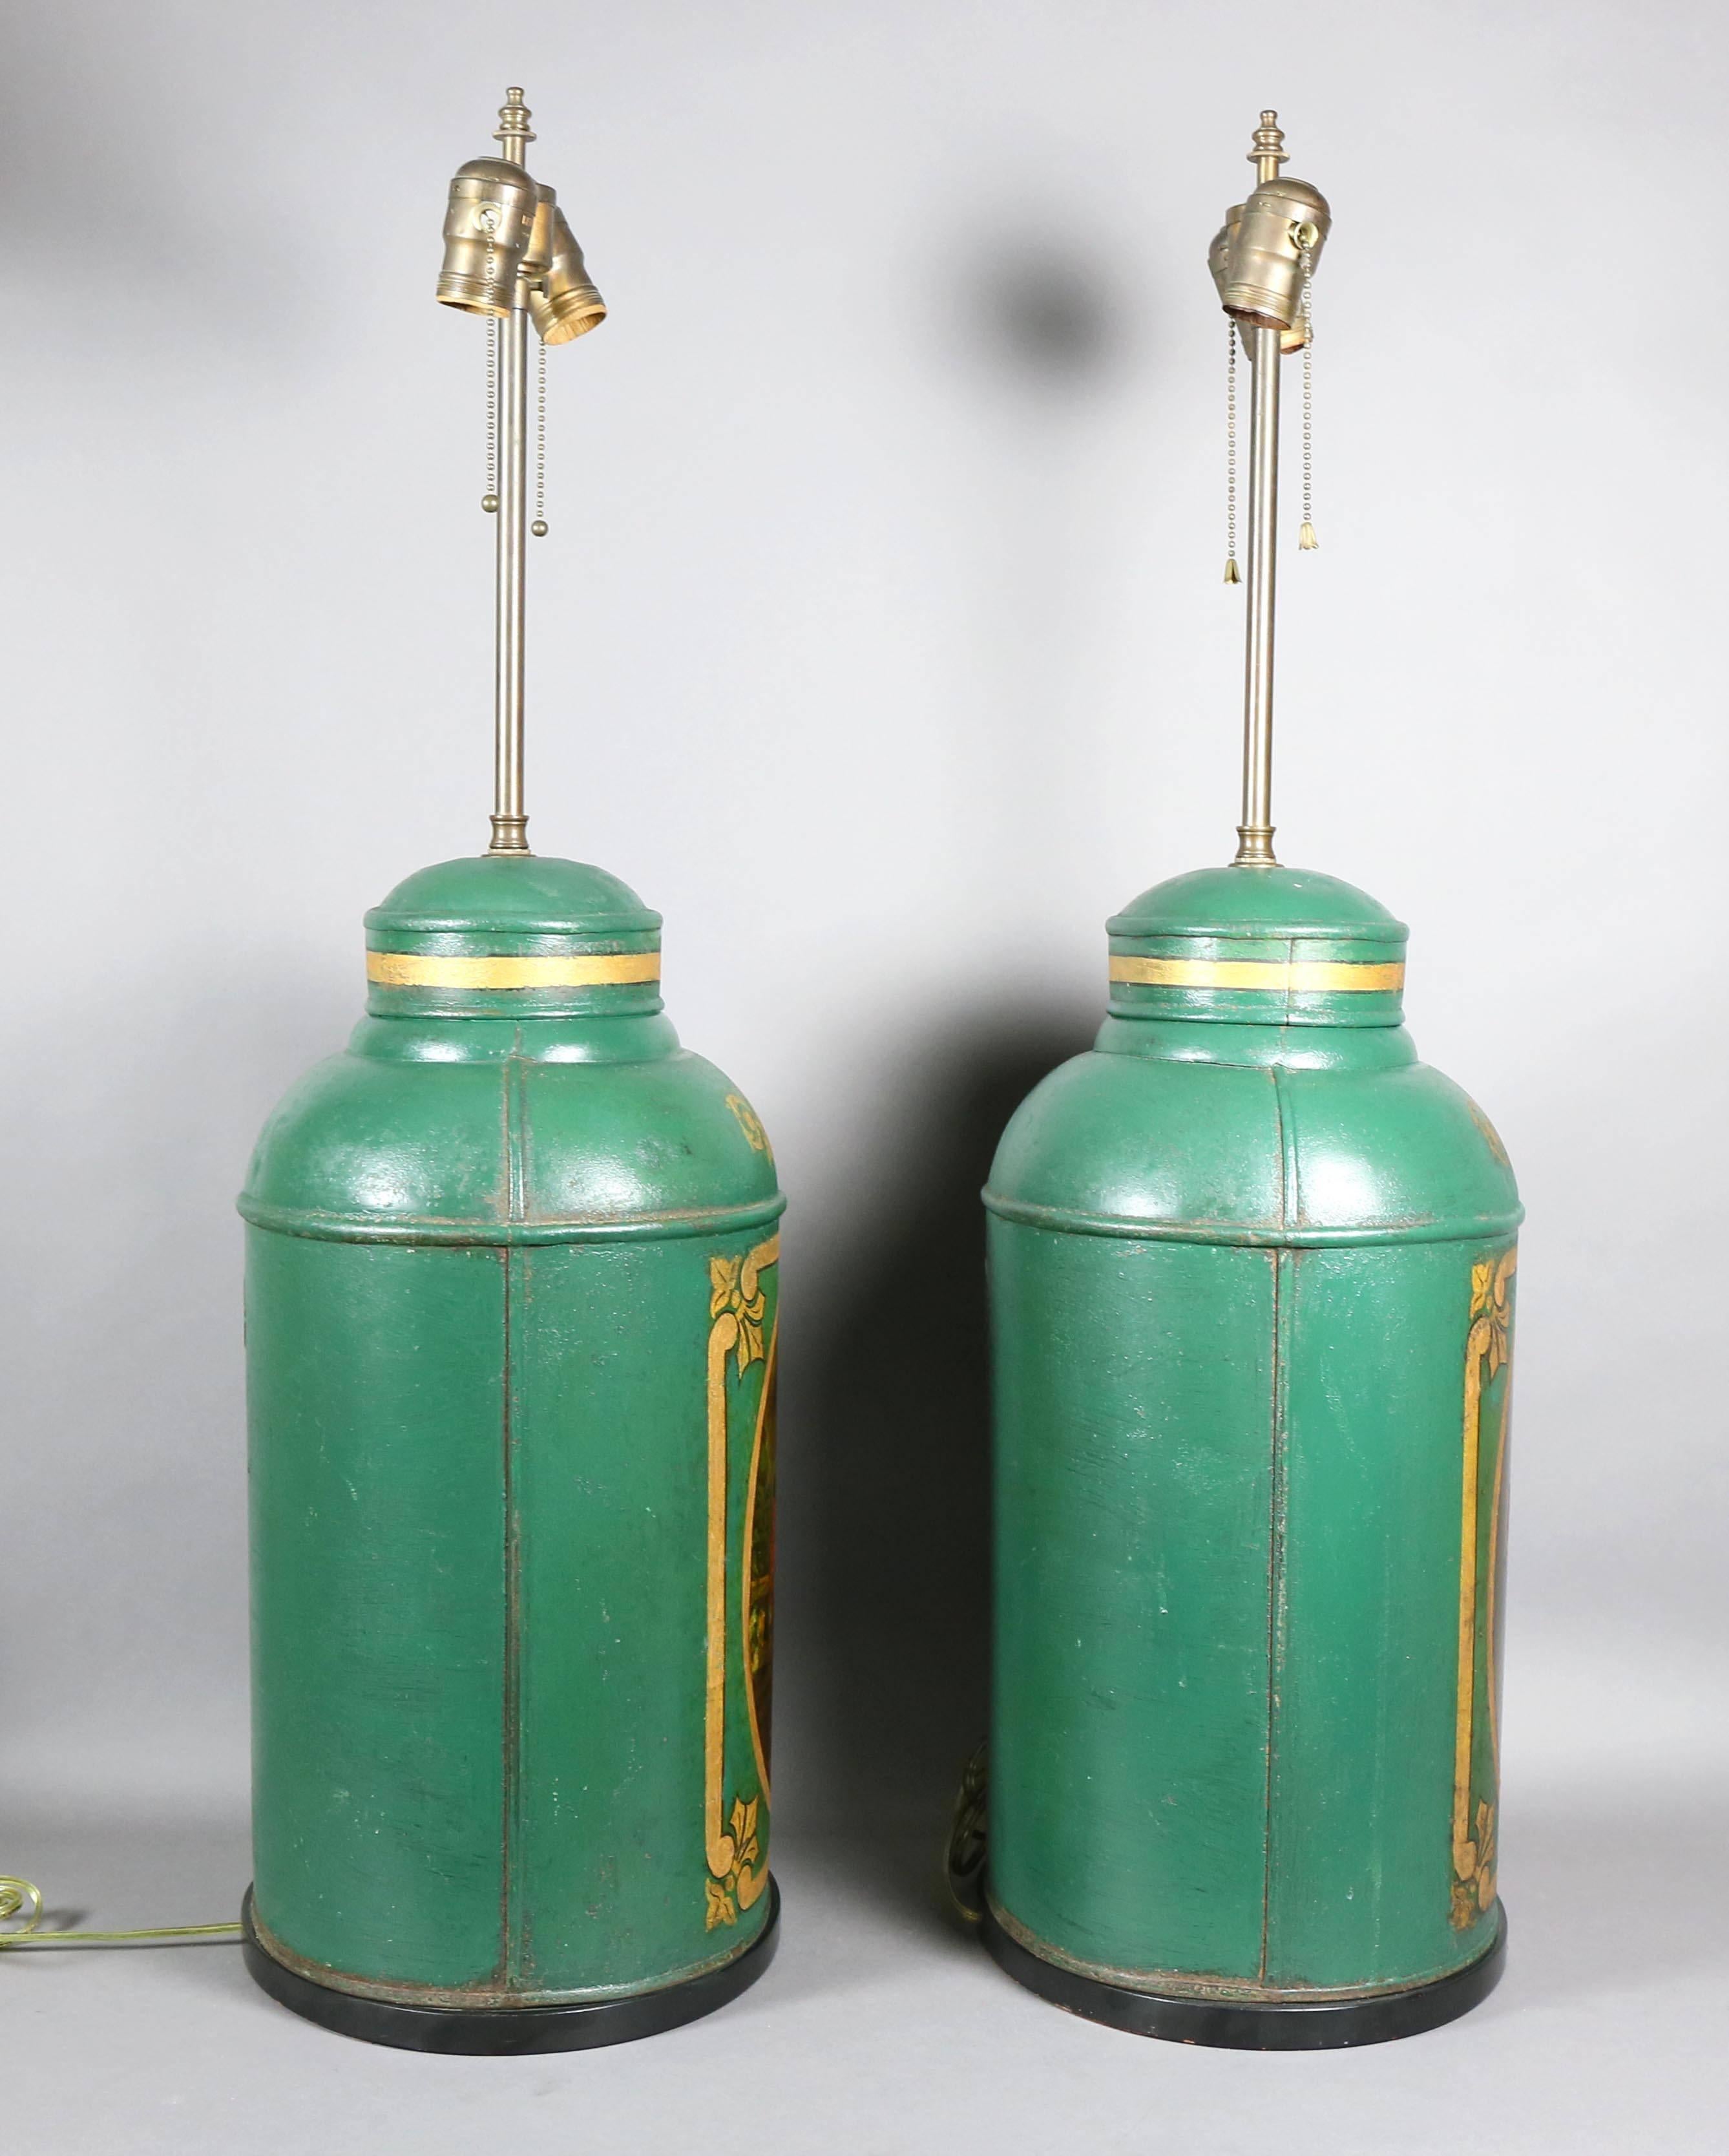 Green painted tea canisters from Parnall & Sons, Bristol, featuring scenes of Asian men and women performing daily routines.